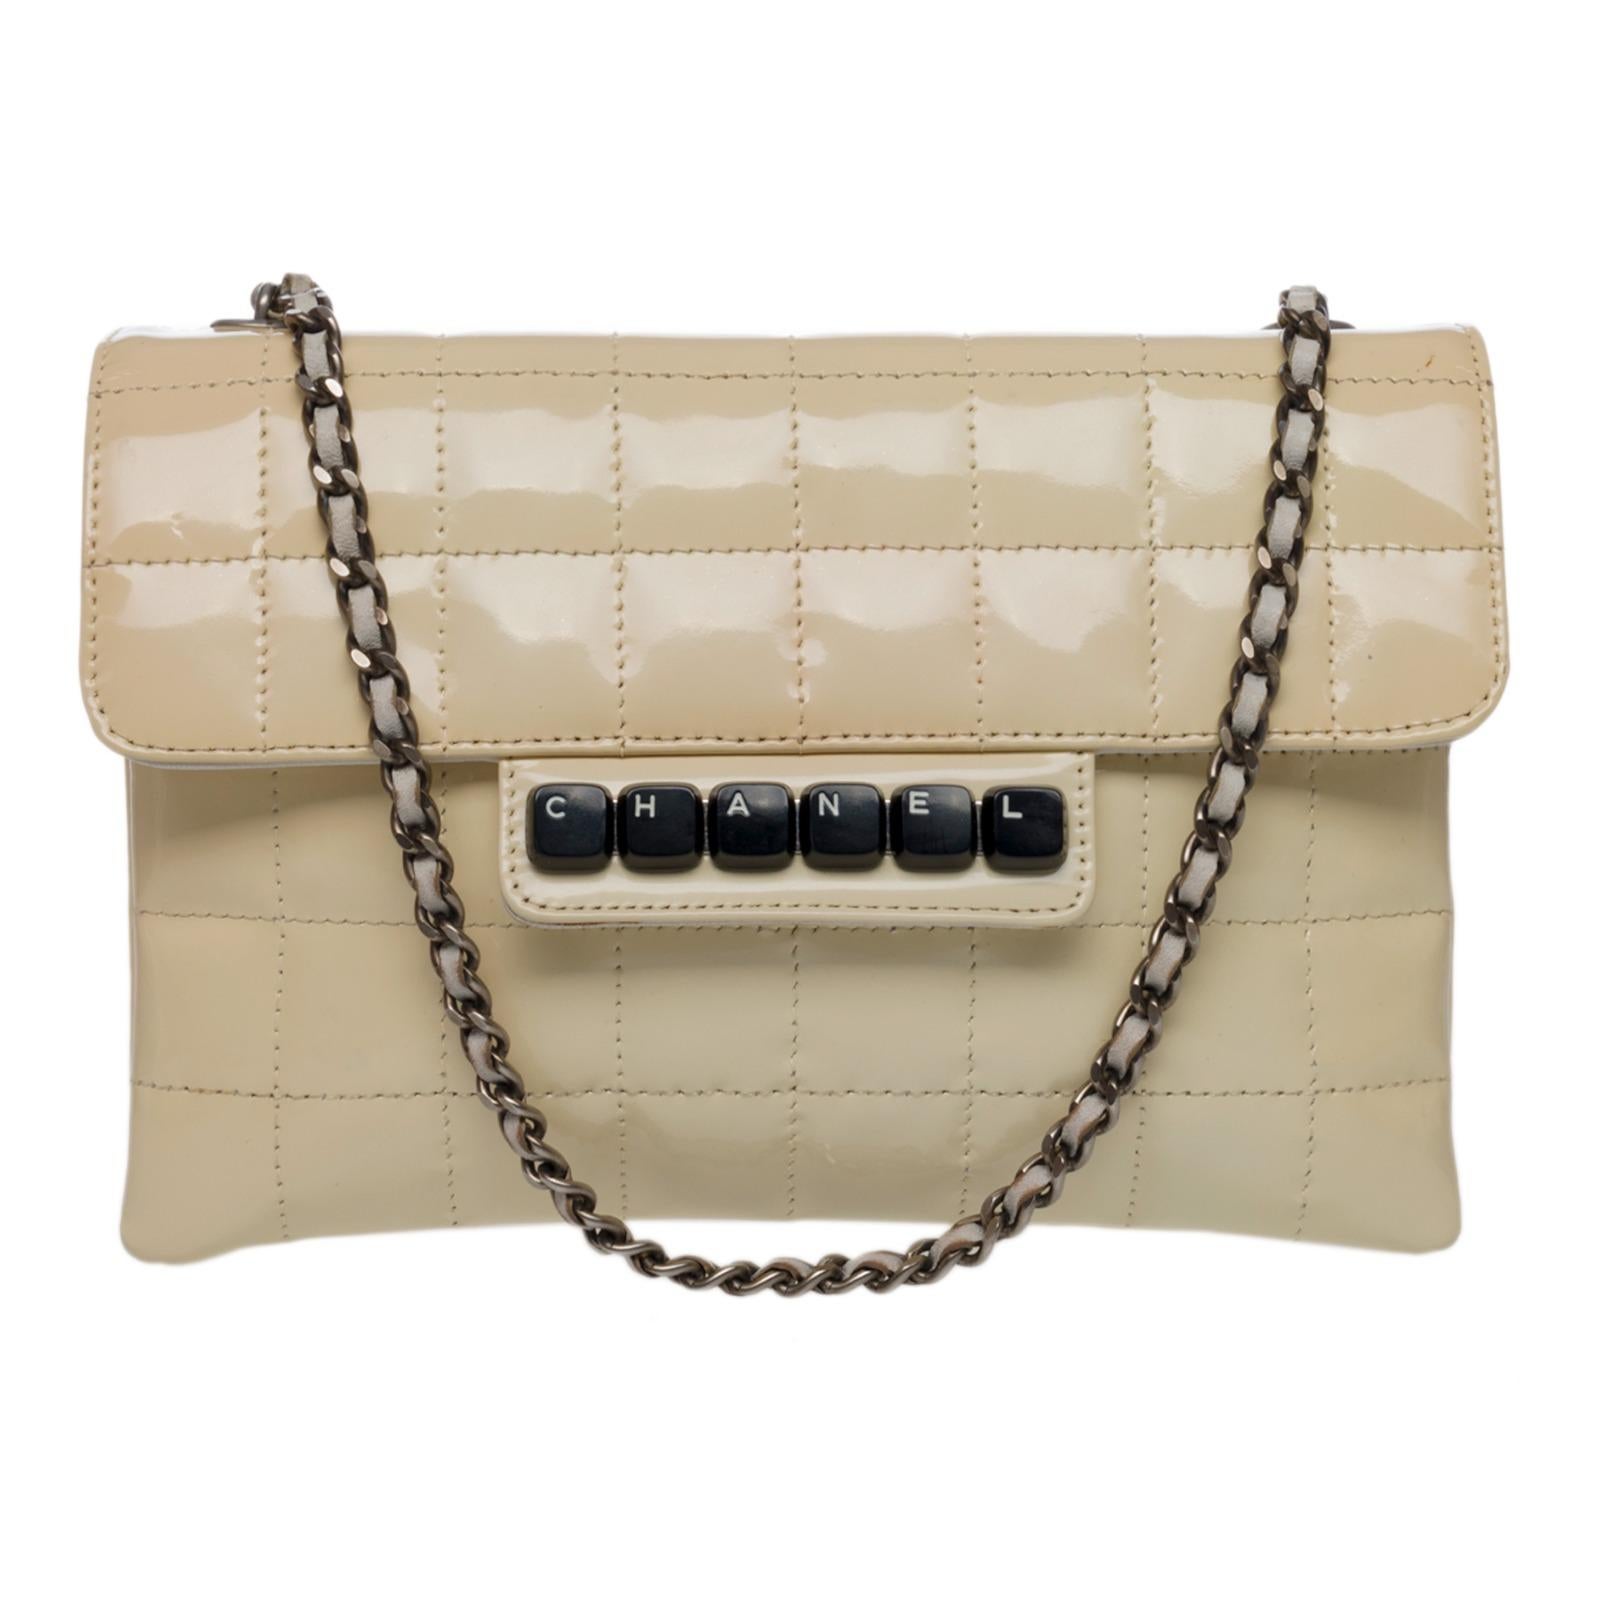 Wonderful Chanel Chocolate Bar Clavier handbag in beige quilted patent leather, hardware in silver metal, one chain strap in silver metal interwoven with white leather allowing the bag to be worn in the hand and on the shoulder

Flap closure,